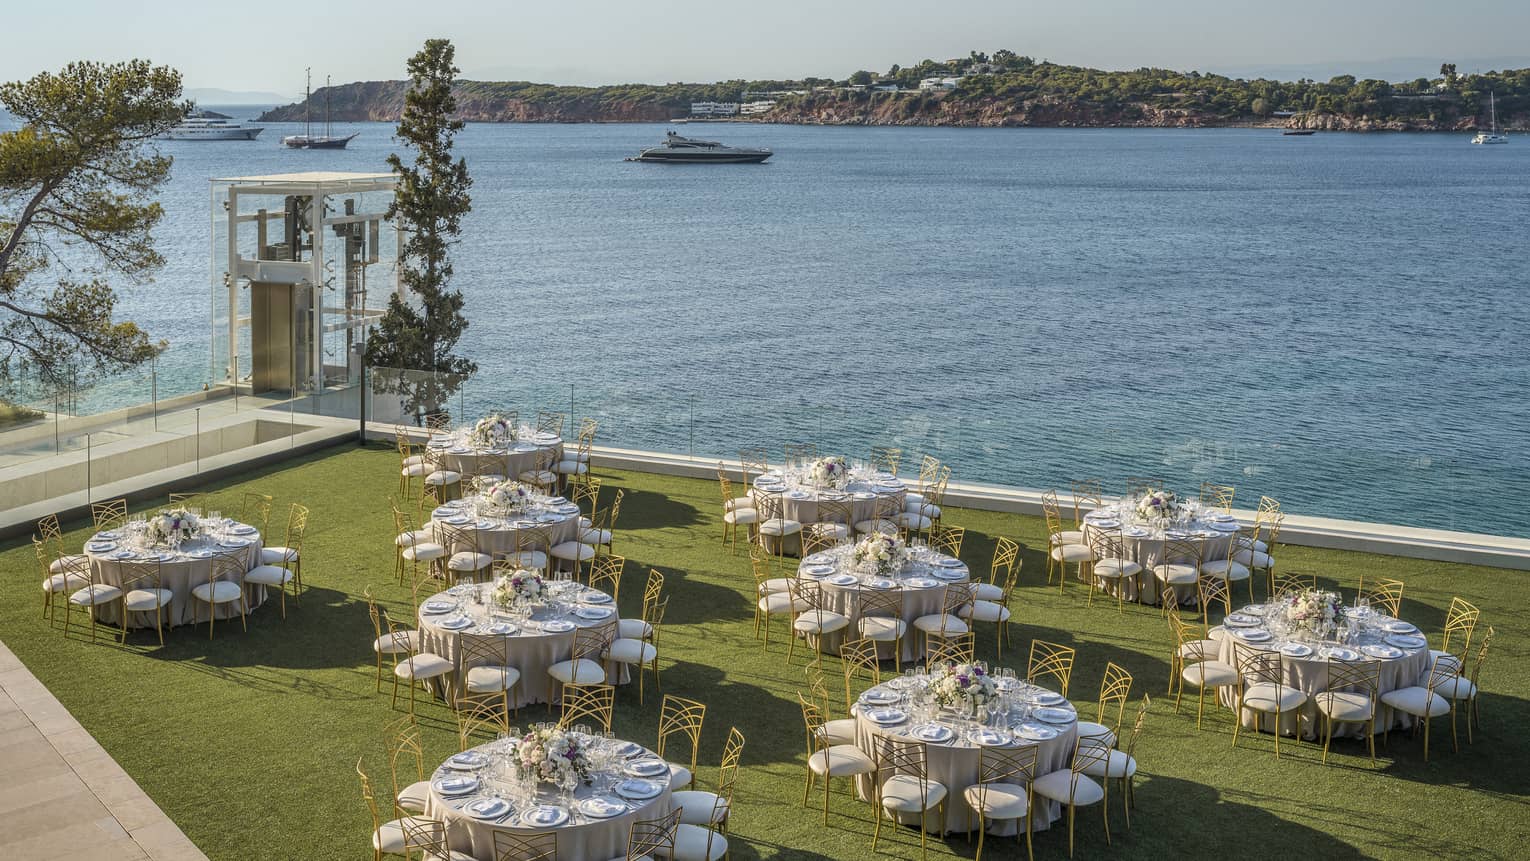 Ten round tables with gold and white chairs and flowers outside on grass overlooking ocean